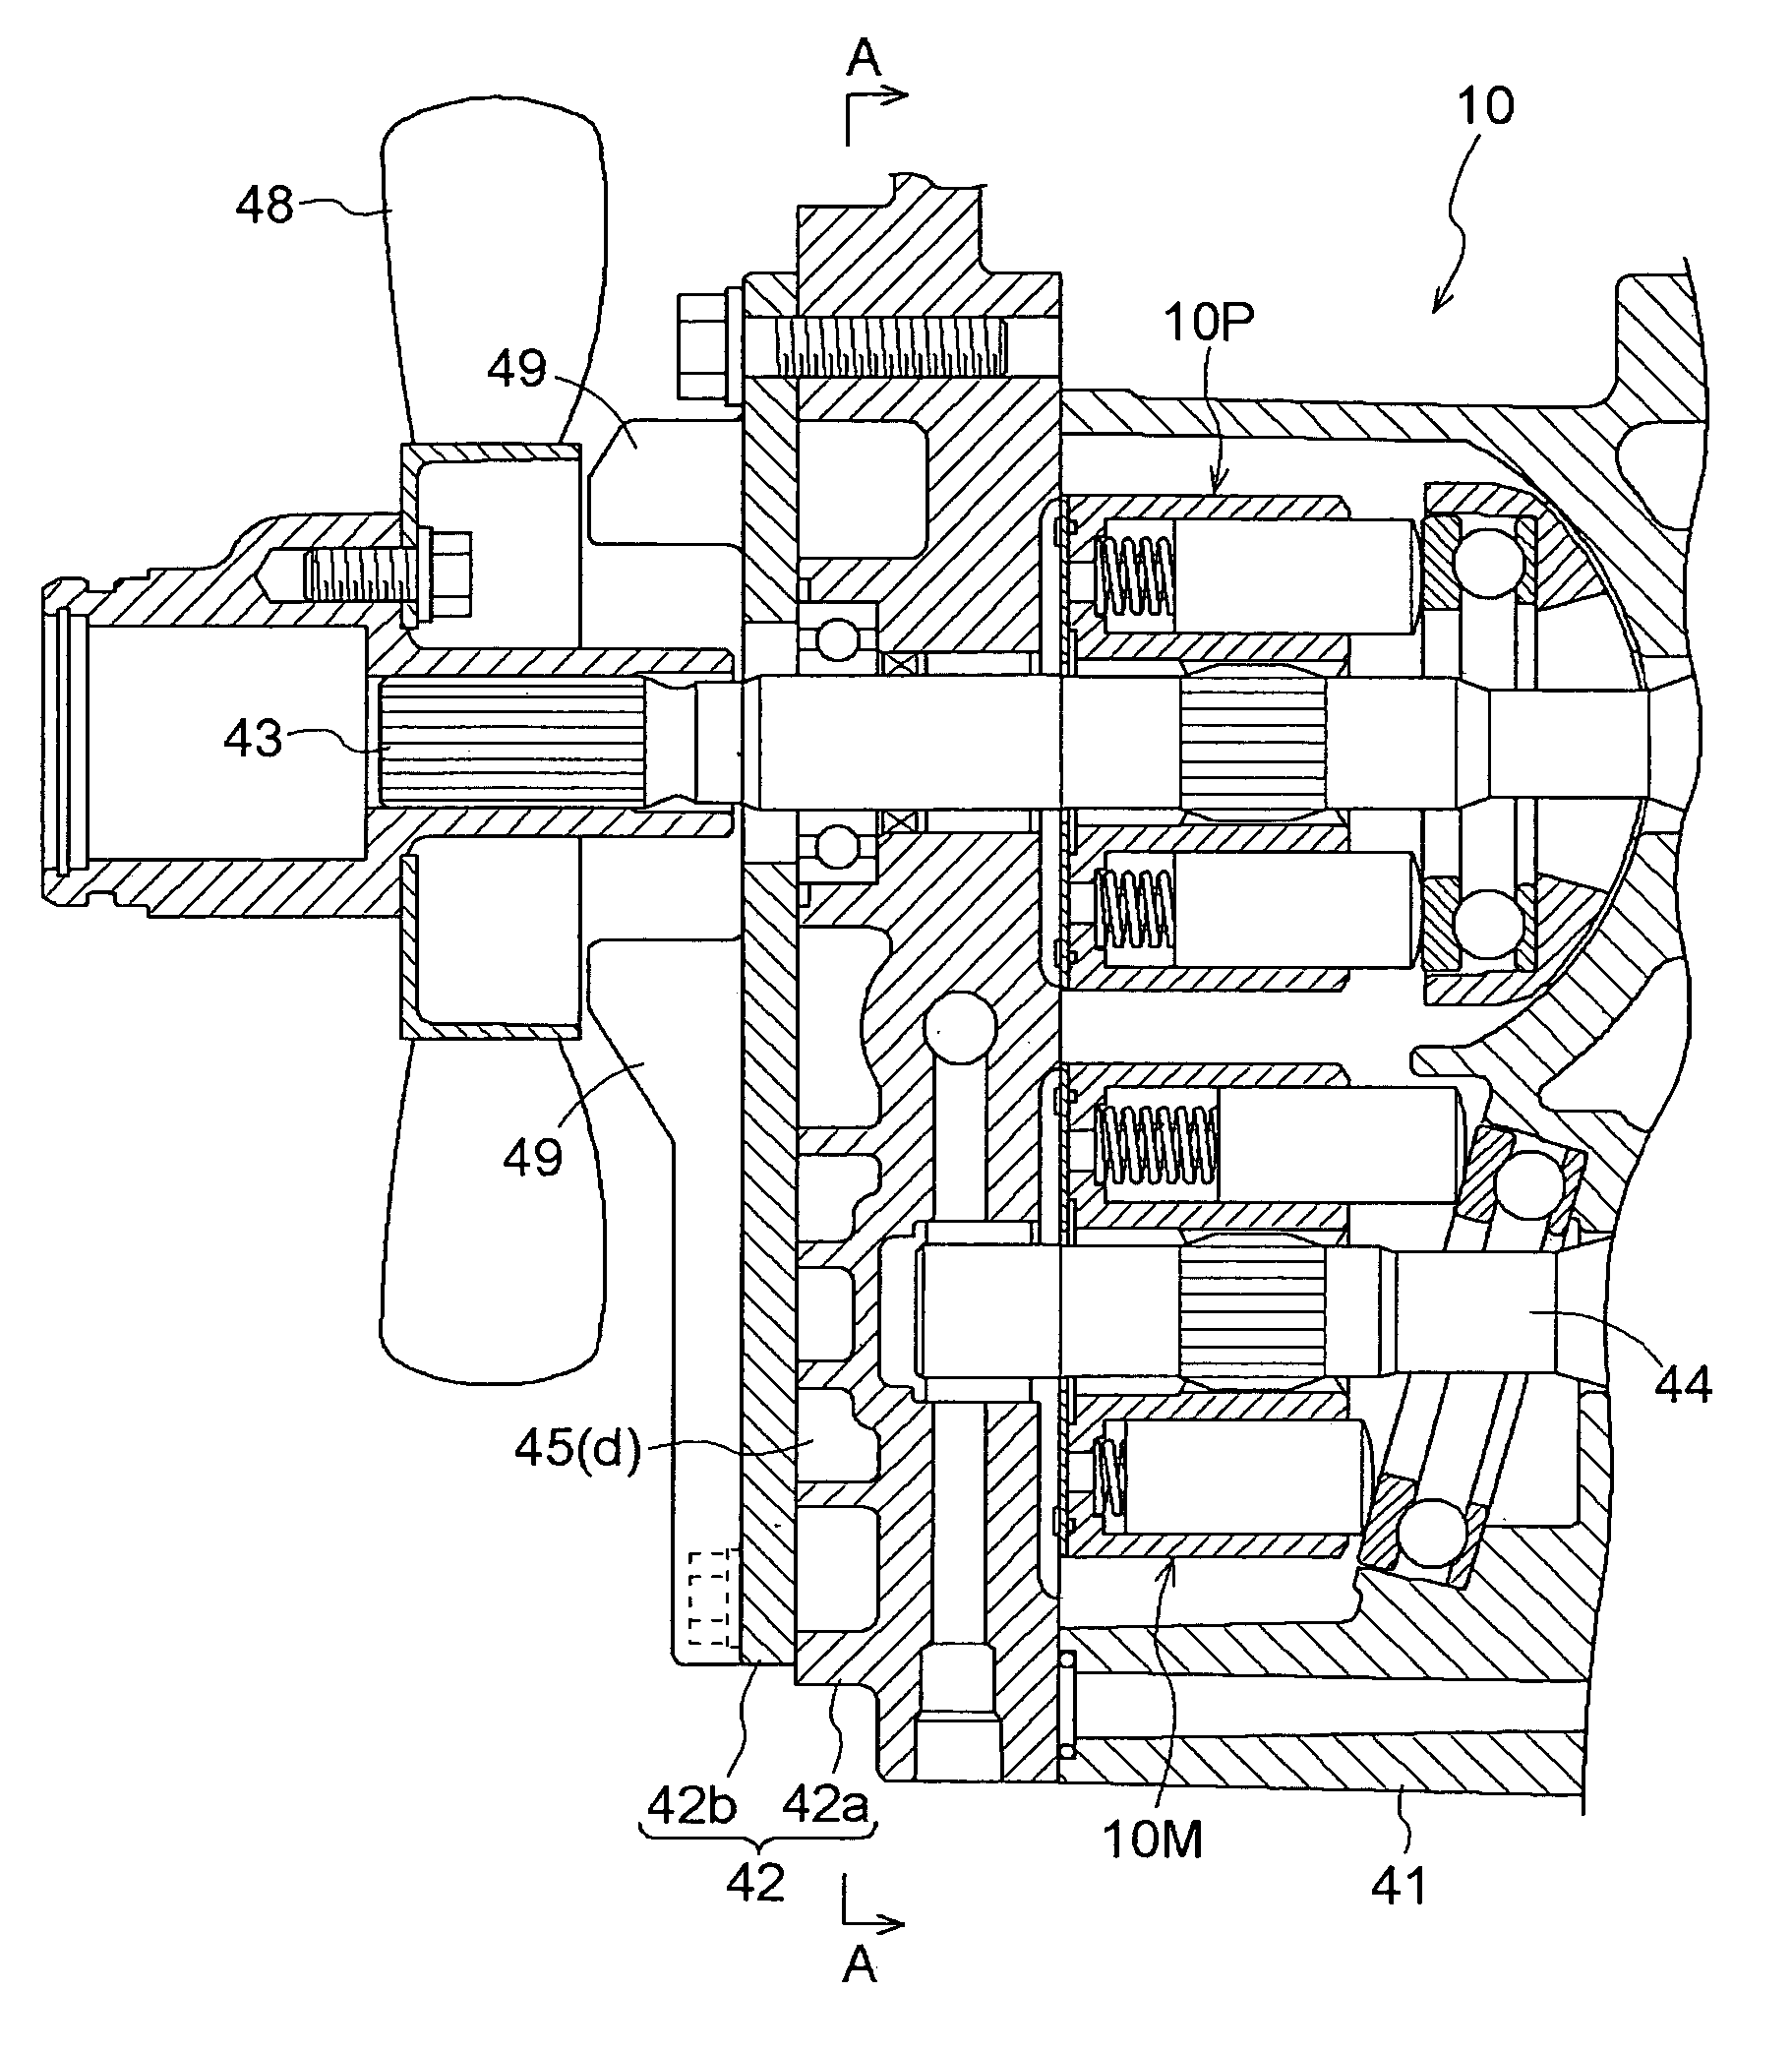 Hydrostatic continuously variable transmission